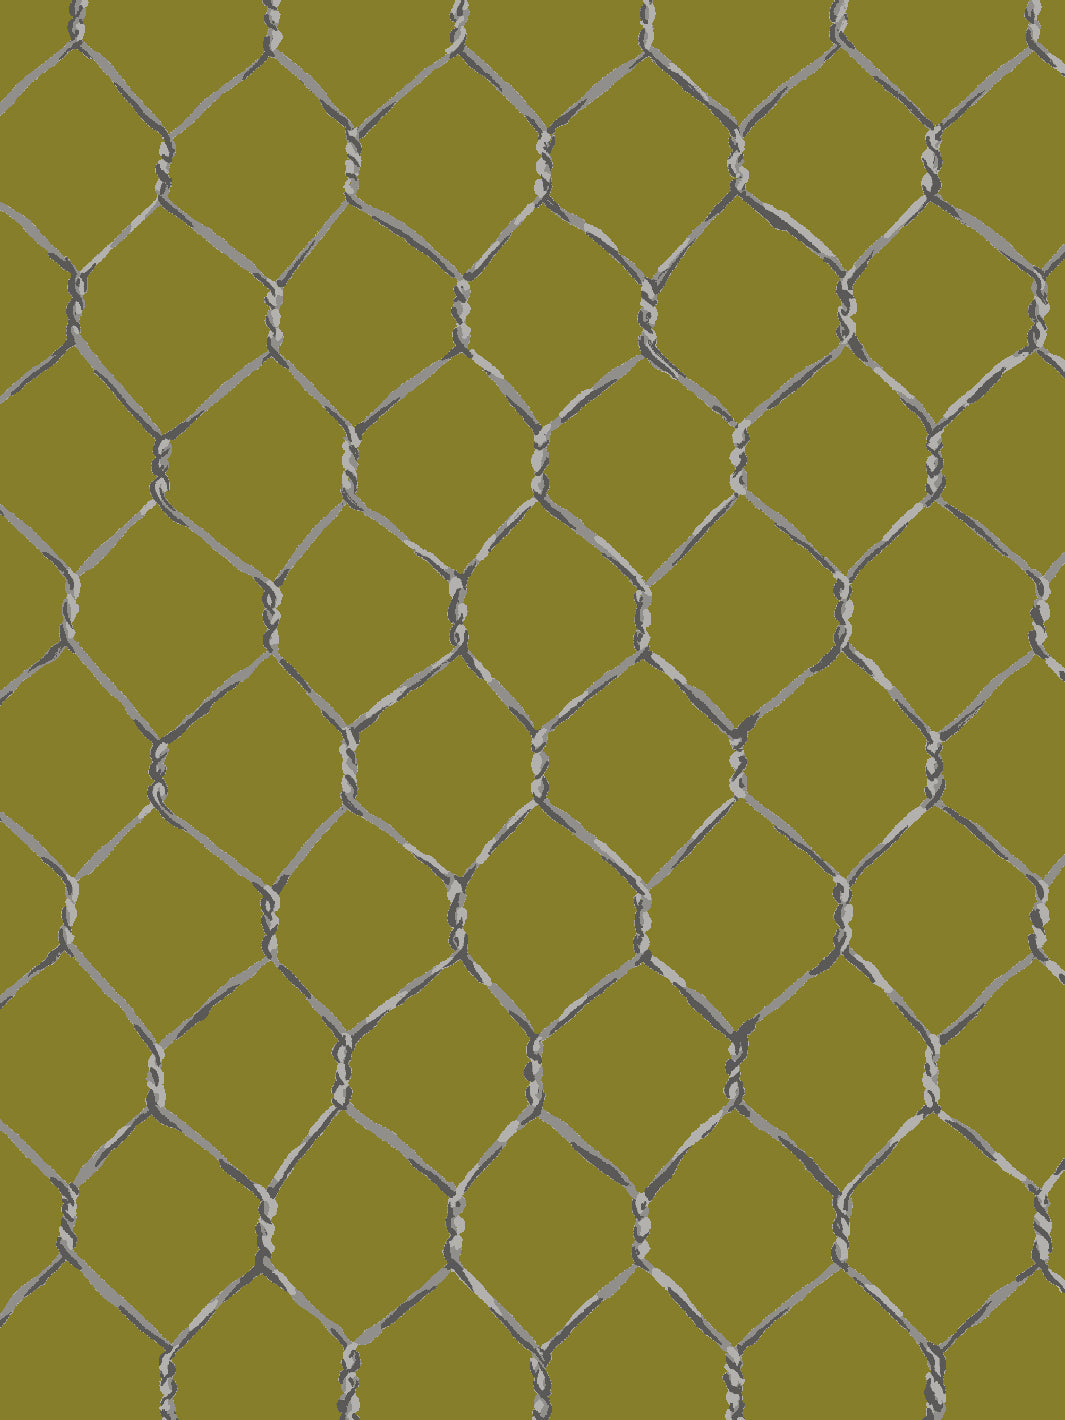 'Evelyn's Chicken Wire' Wallpaper by Sarah Jessica Parker - Metal on Olive